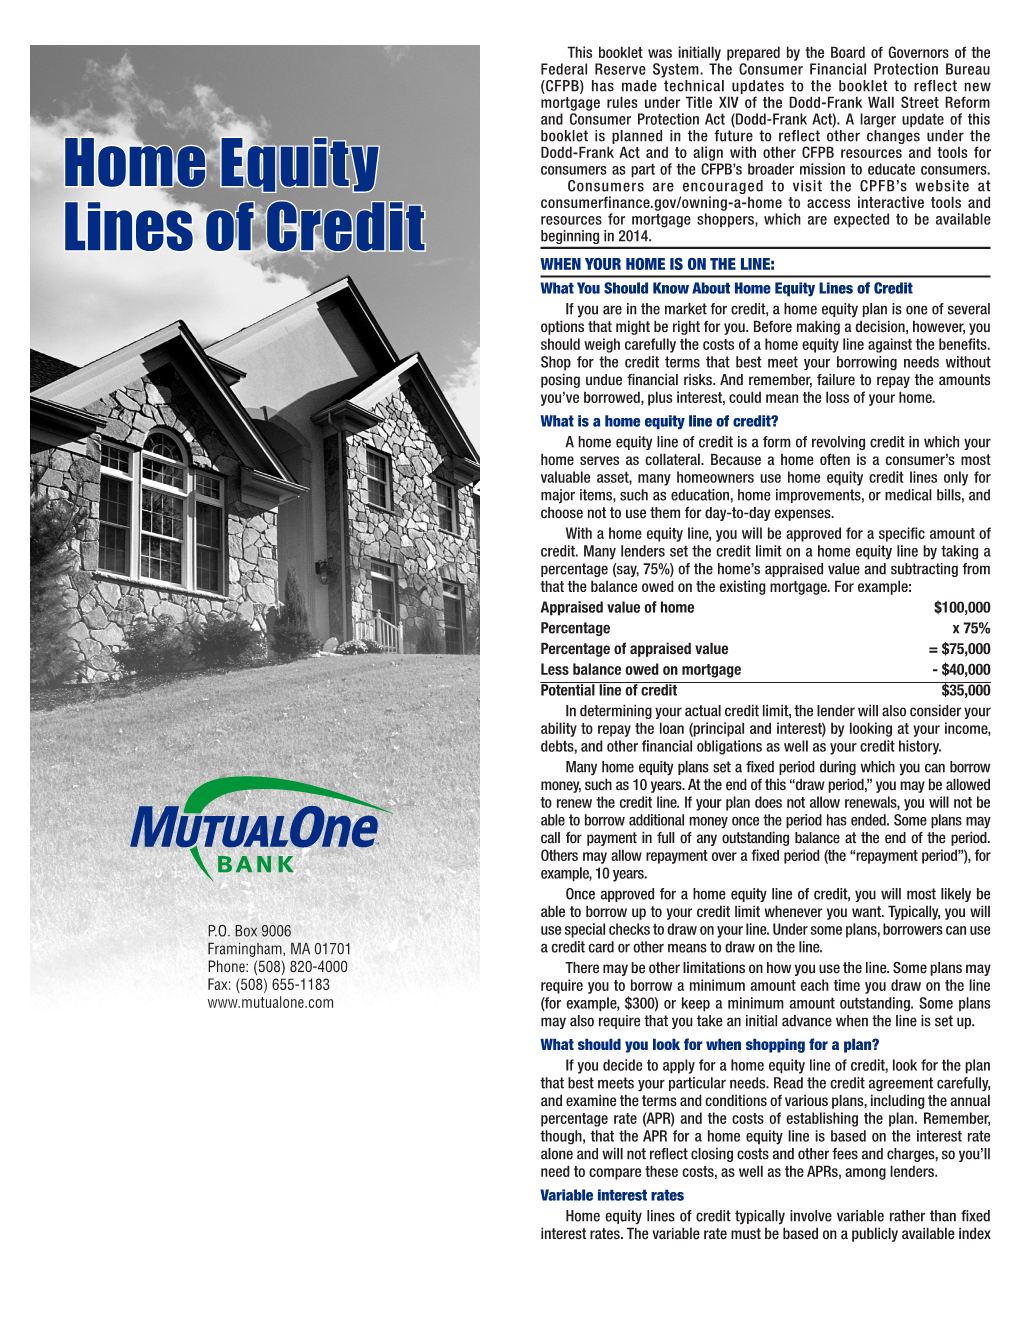 Home Equity Line of Credit Important Terms Disclosure